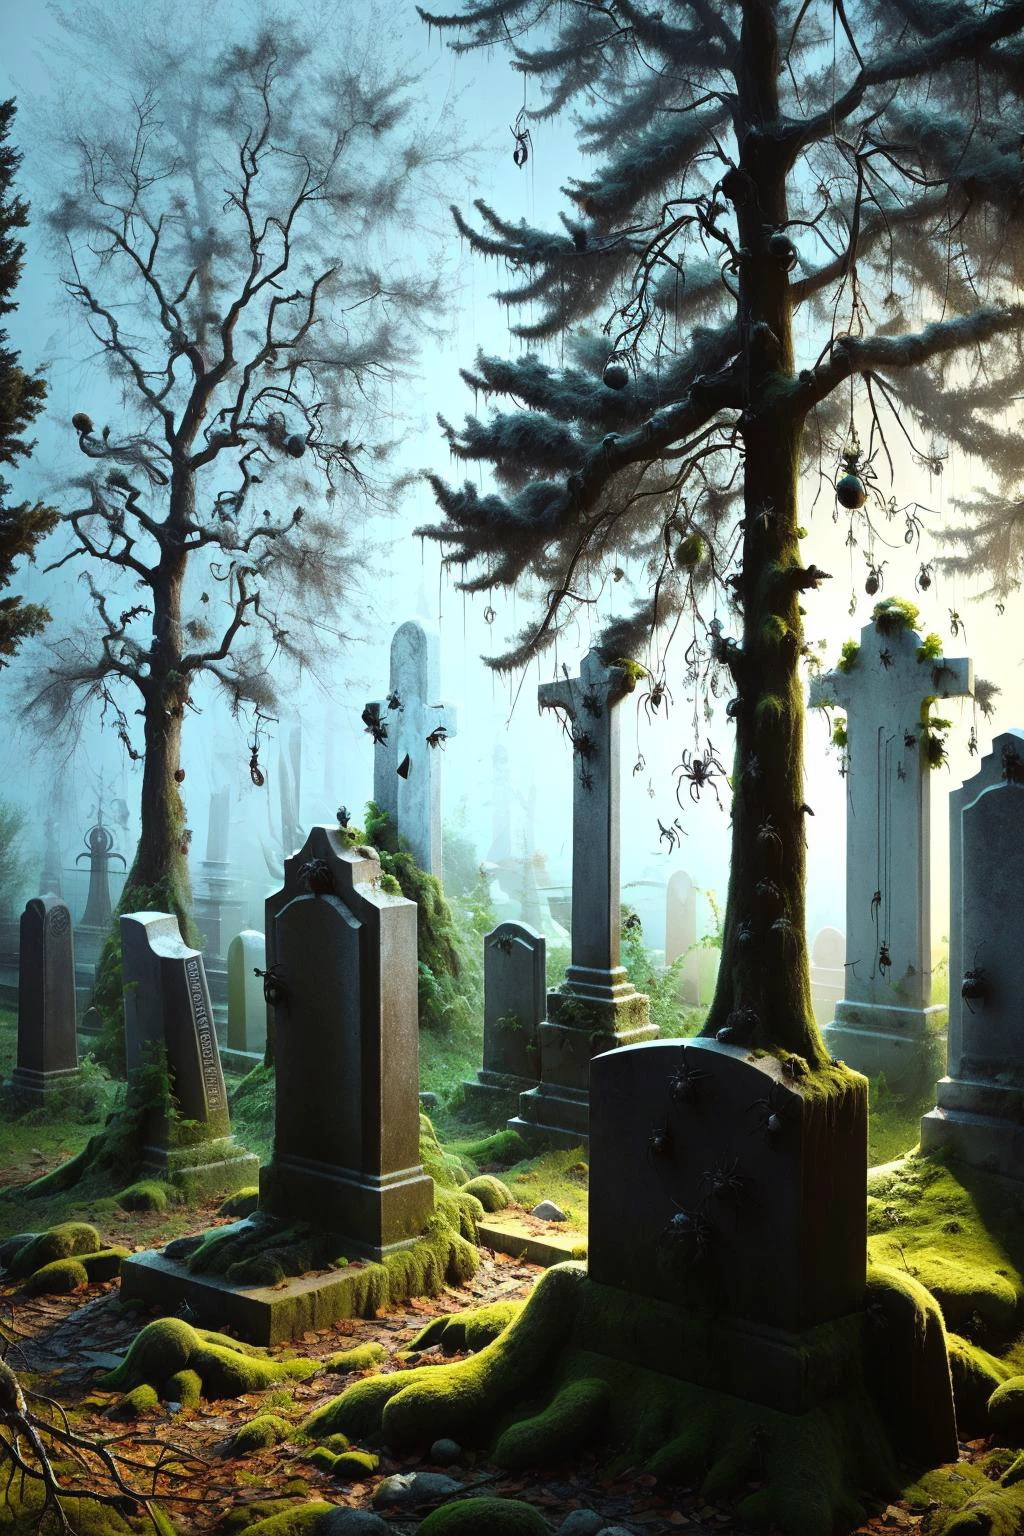 A foggy graveyard at night, with ancient tombstones and gnarled trees, ais-spiderz crawling over the graves and hanging from the branches, creating a chilling and ghostly ambiance 